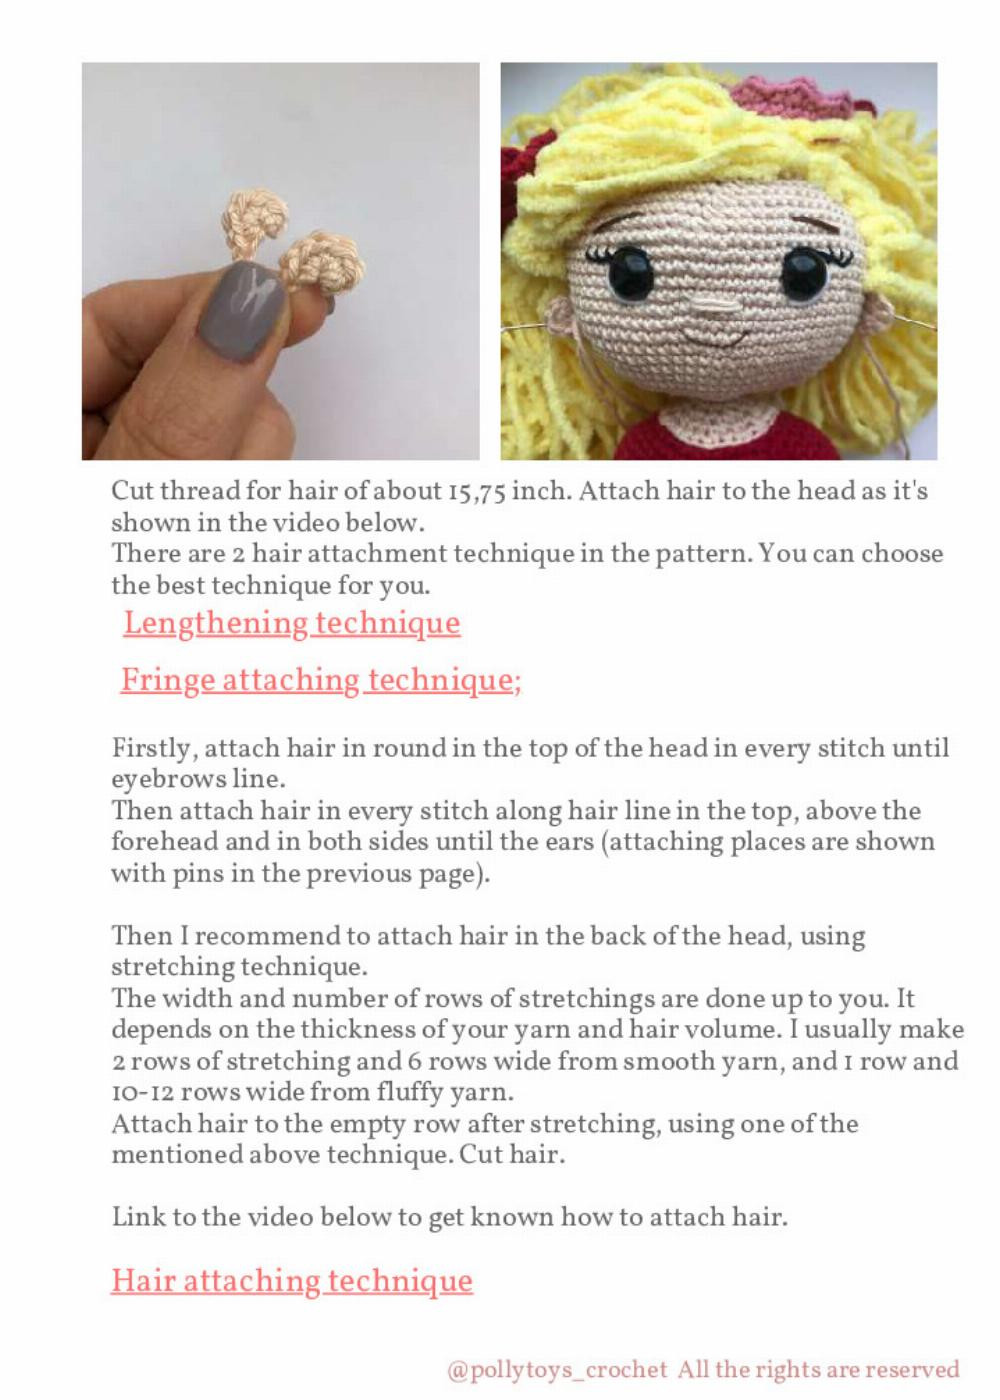 pattern crocheted doll rose the fairy